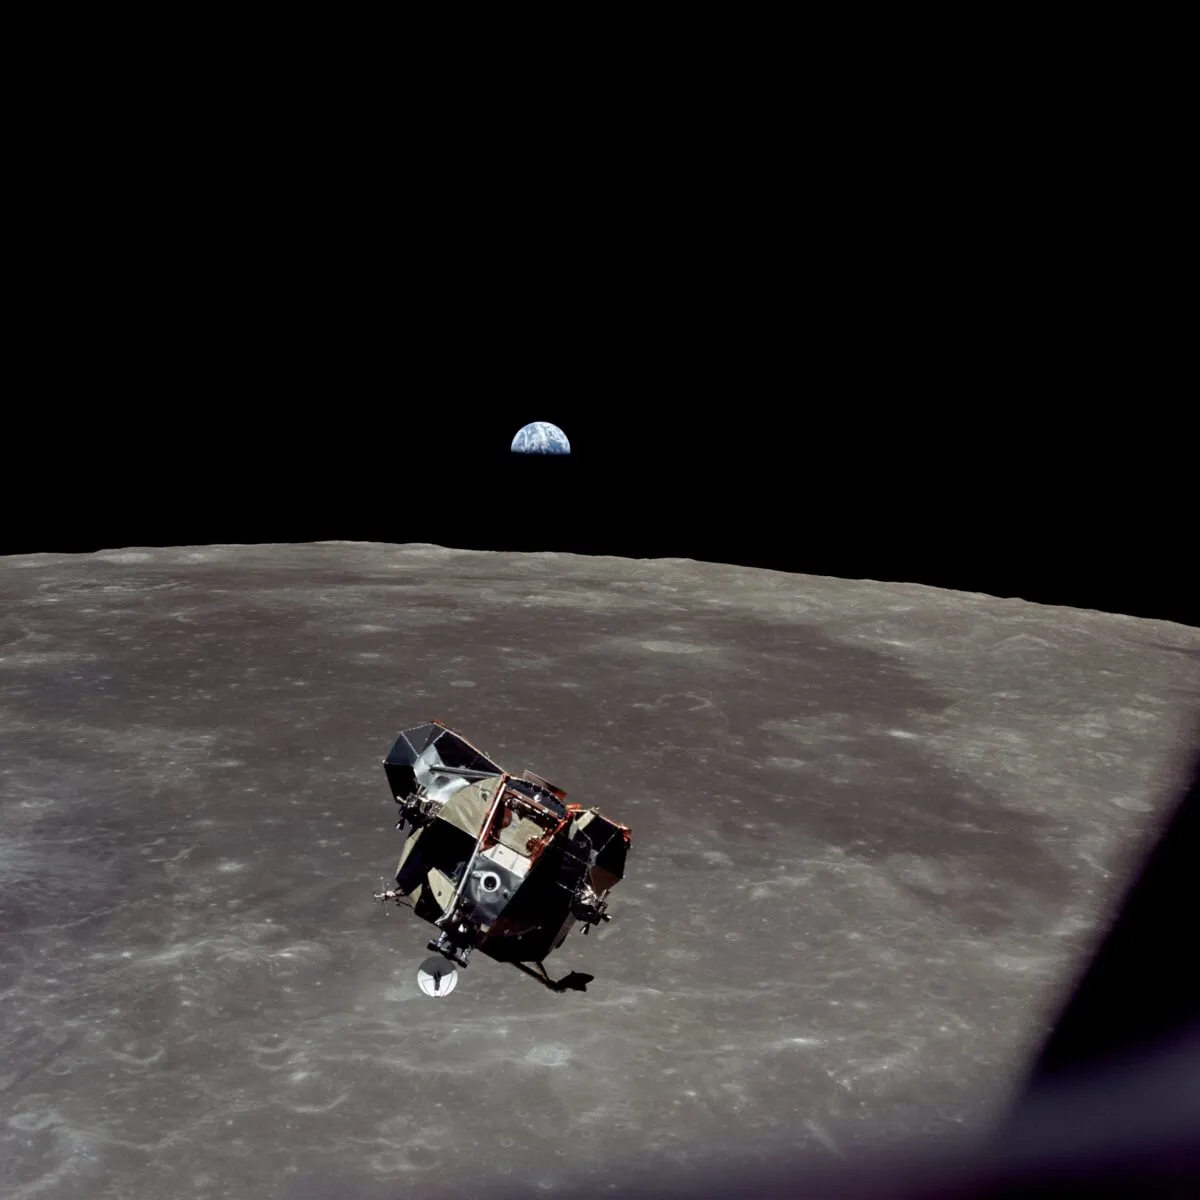 Apollo 11 astronaut Michael Collins captured this image of the Lunar Module carrying Neil Armstrong and Buzz Aldrin back up to the Command Module after the mission that made them the first humans to step foot on the Moon, 21 July 1969. Credit: NASA / restored by Toby Ord